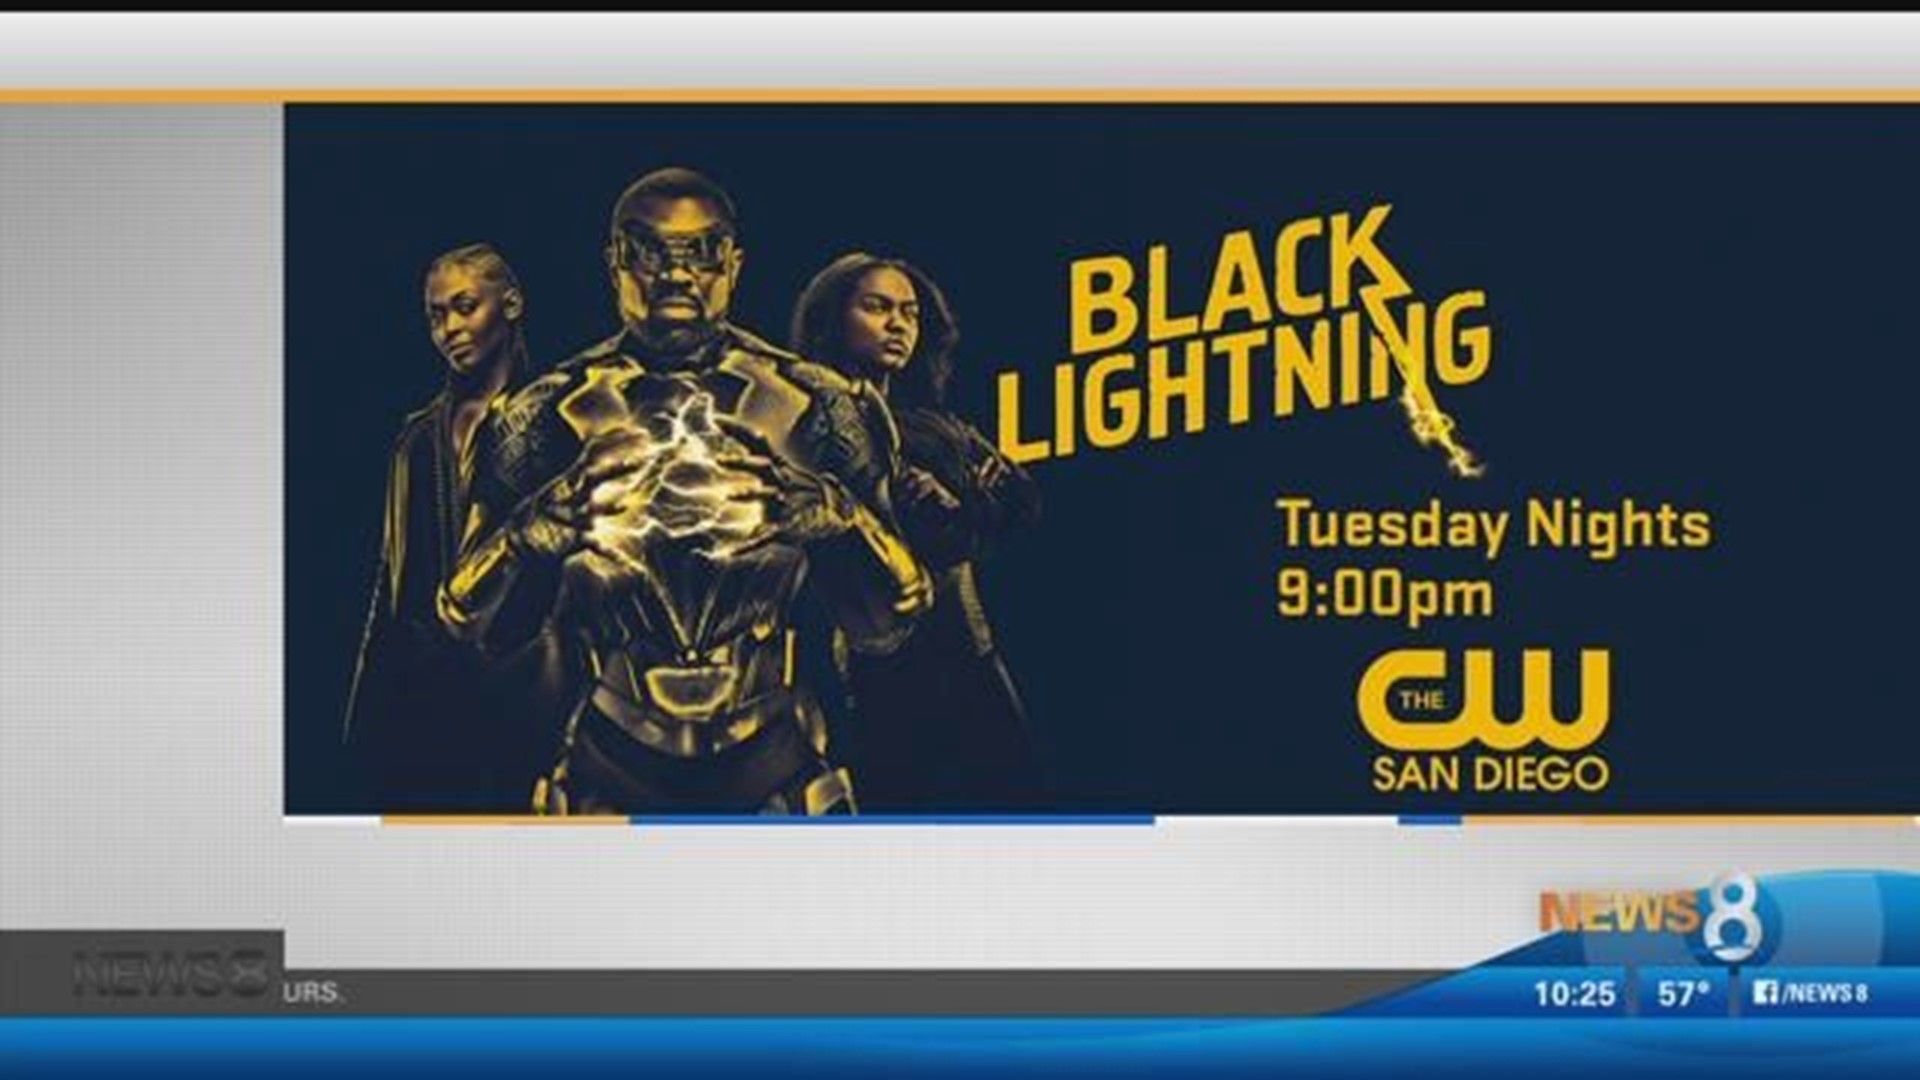 "Black Lightning" cast looking forward to Comic-Con